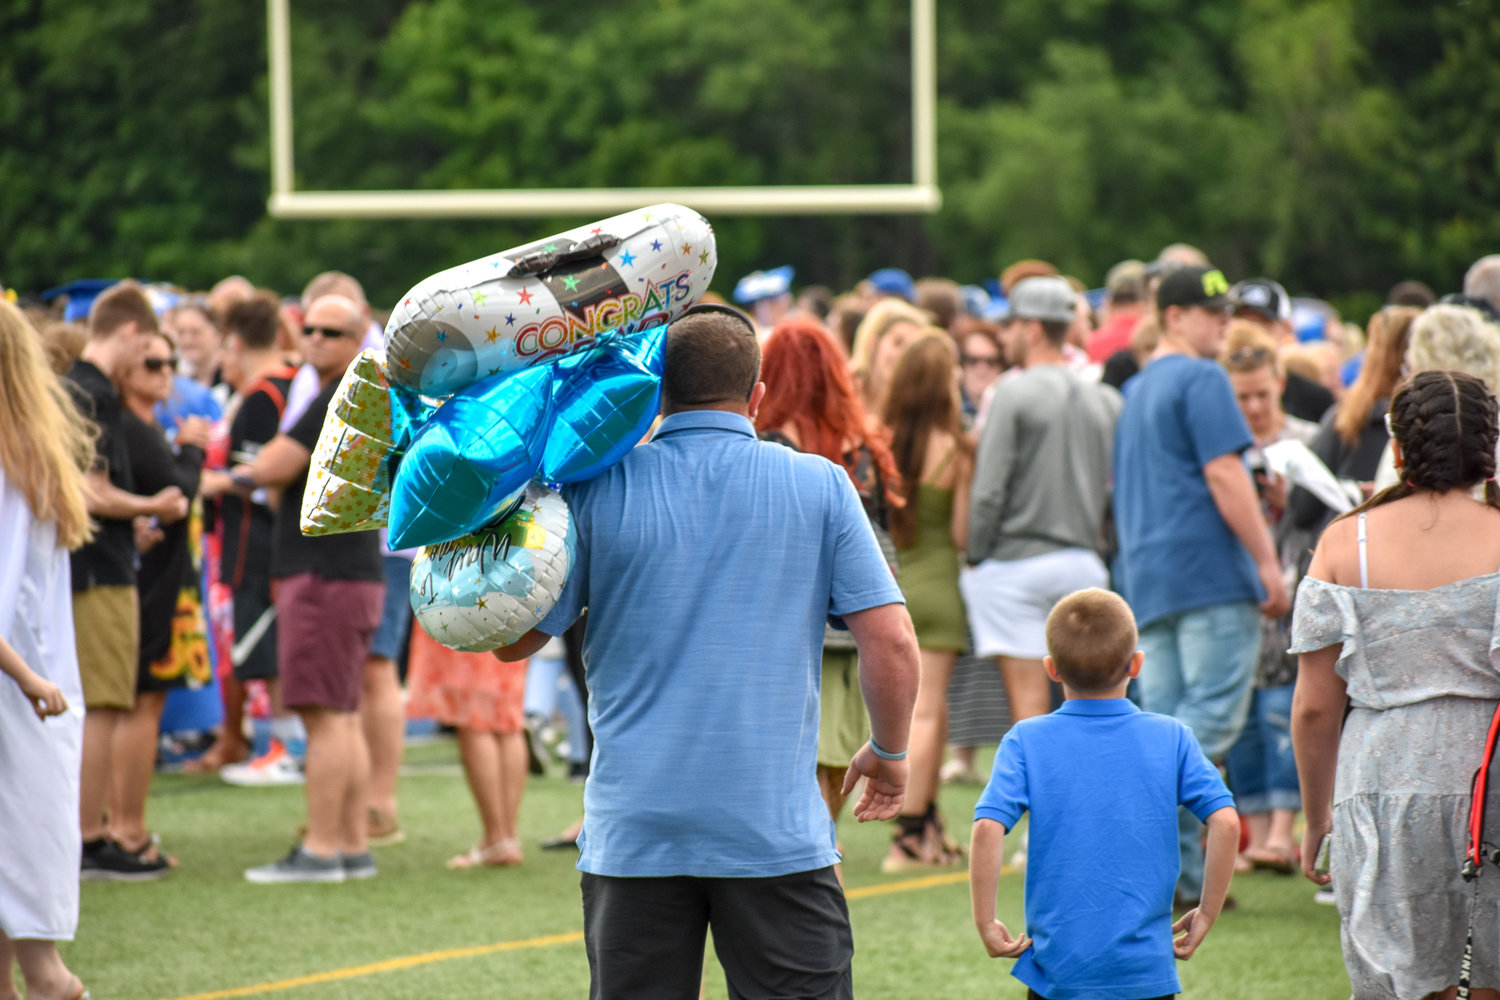 Family search for their special graduate with congratulatory balloons in tow after the Camden high school Class of 2022 commencement ceremony.